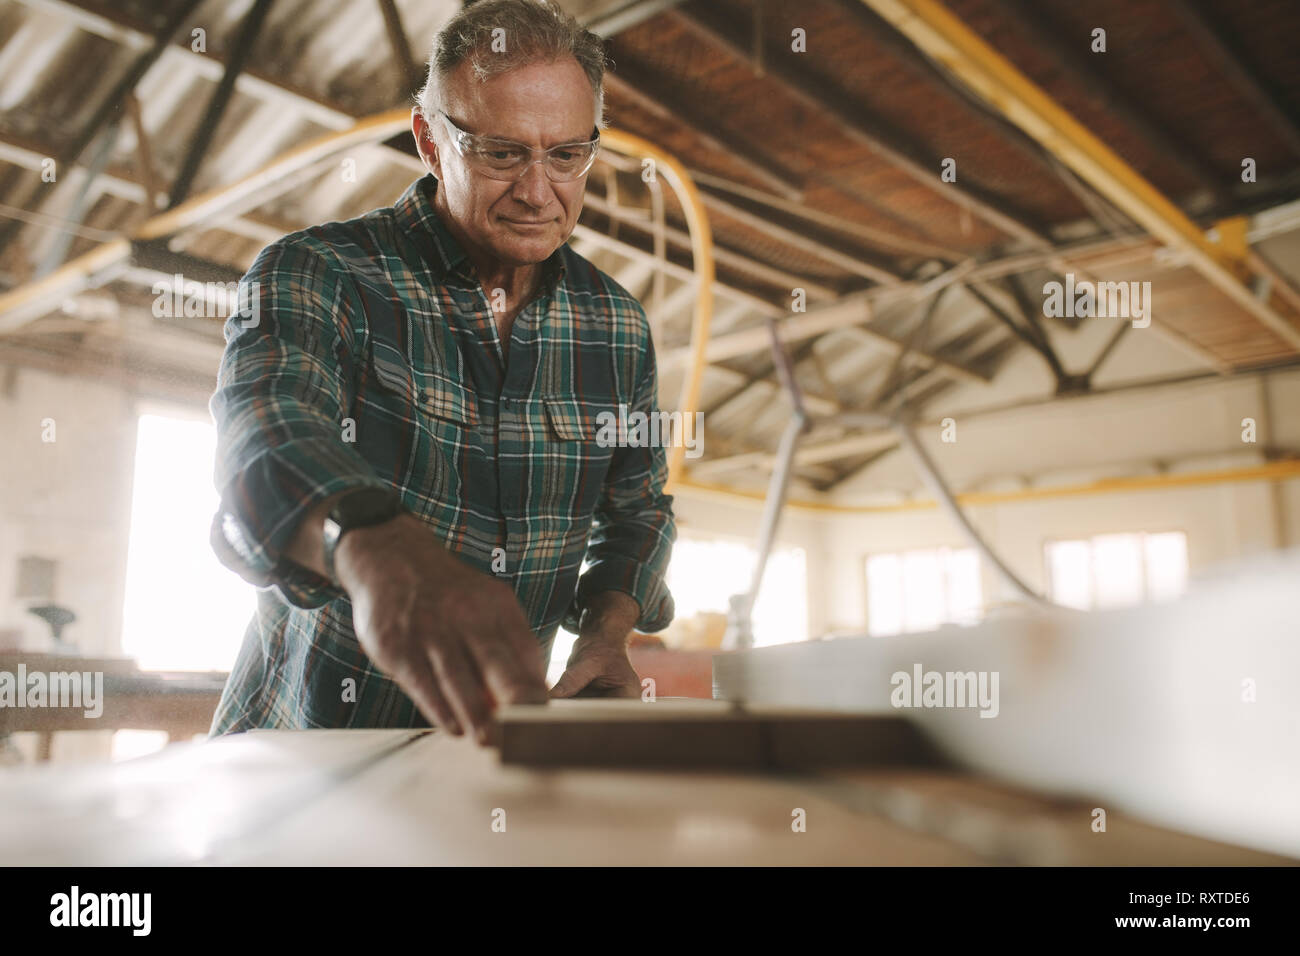 Senior male carpenter working on electric table saw machine cutting wood planks. Skilled mature carpenter working in carpentry workshop. Stock Photo